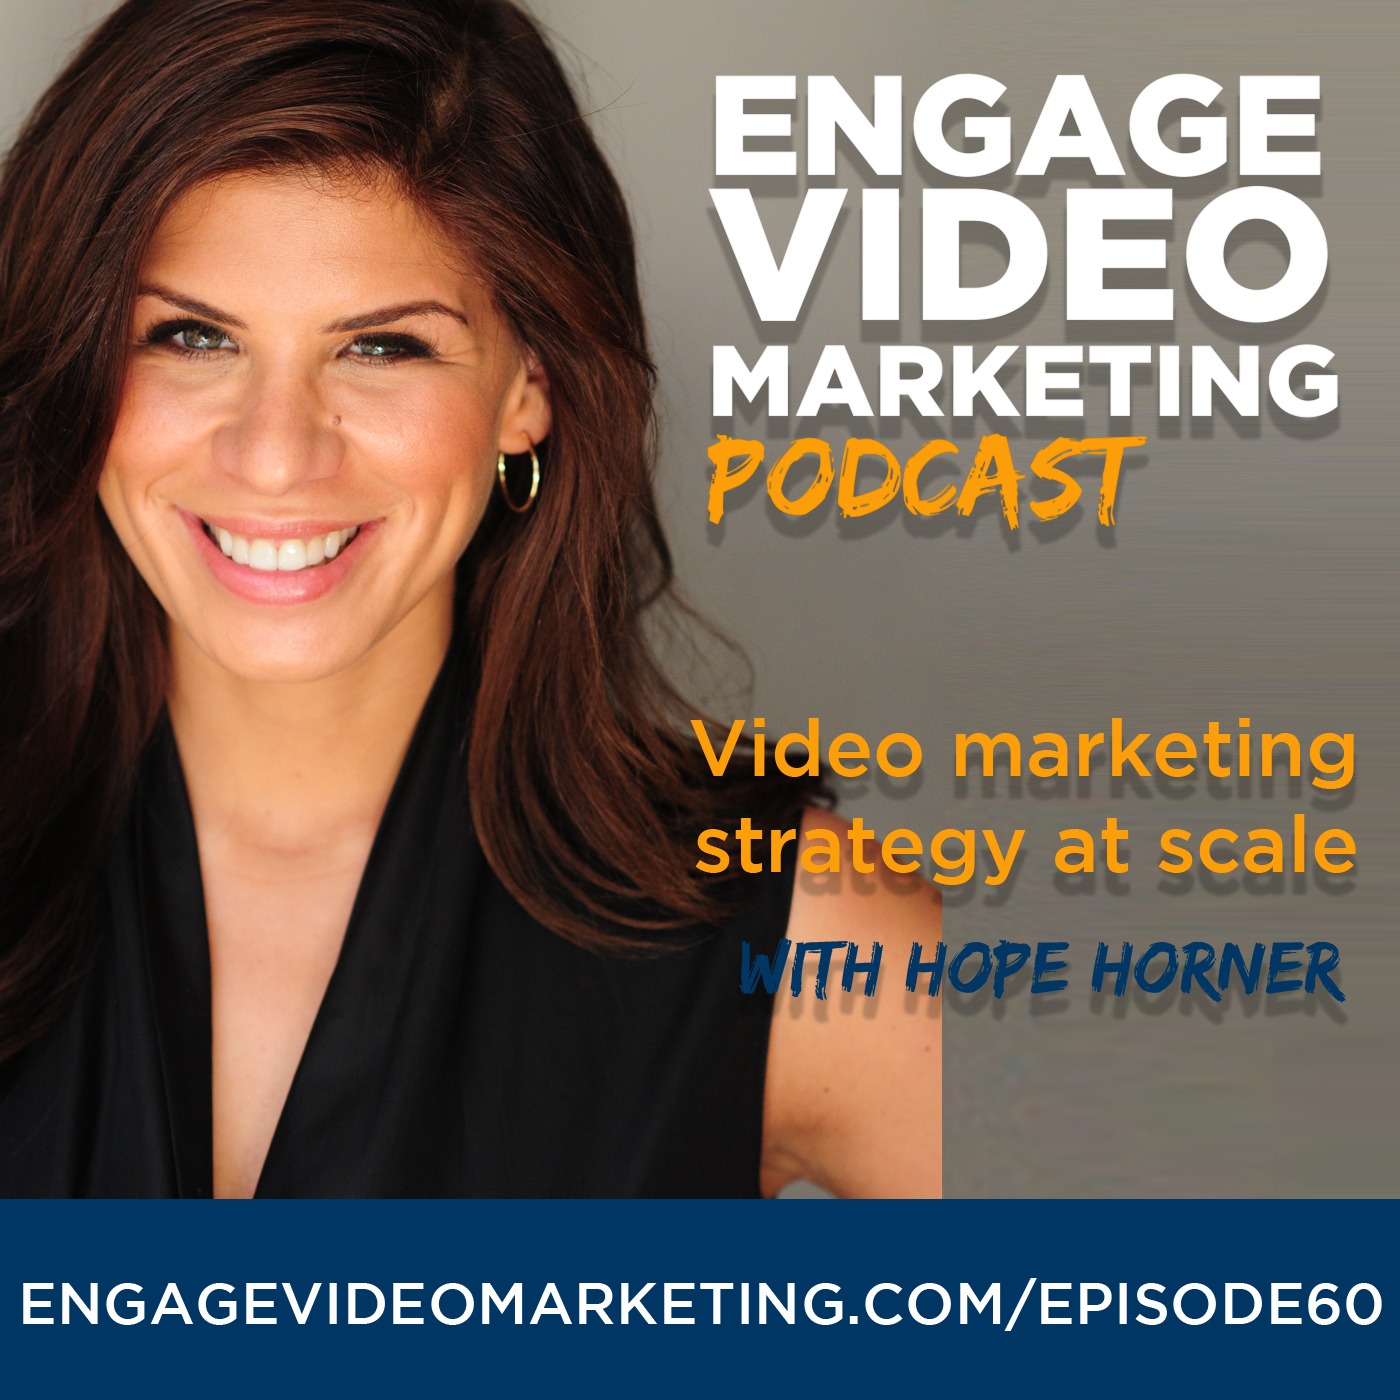 Video marketing strategy at scale with Hope Horner